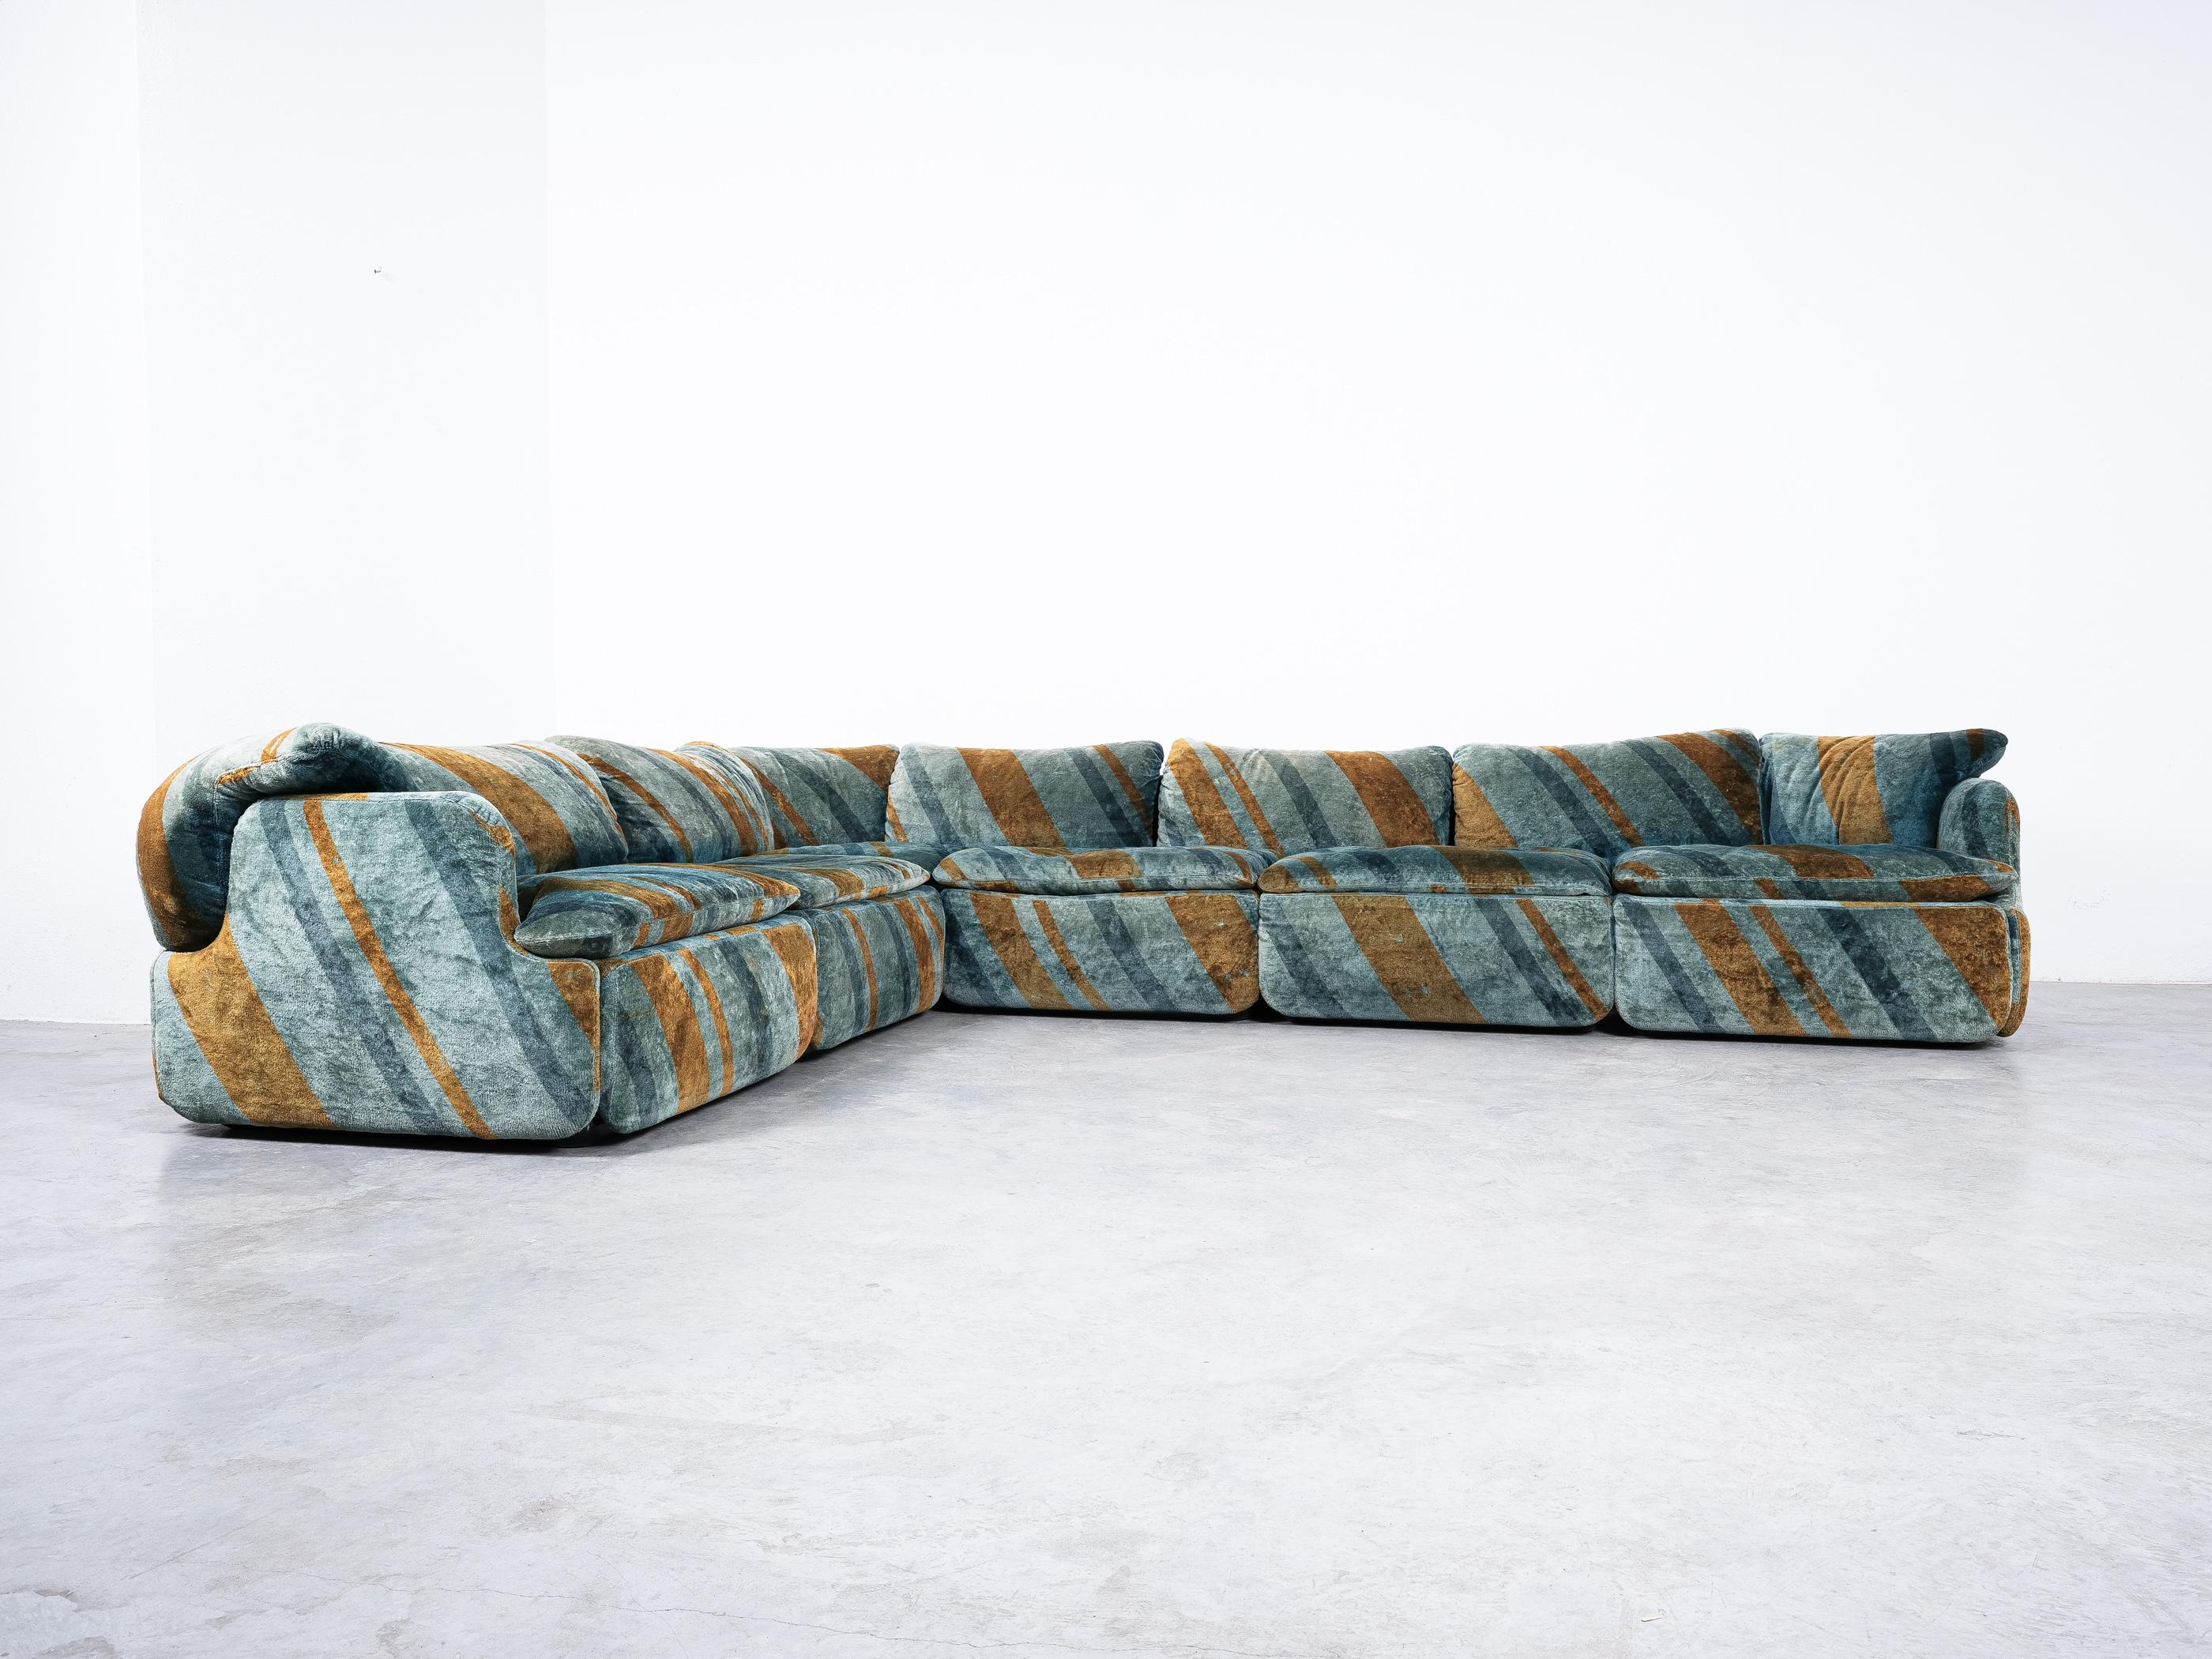 Sofa corner ensemble by Alberto Rosselli for Saporiti, “Confidential”, with an extraordinary original velvet upholstery, Italy, 1970. 
It comes with the extra cushions visible in the pictures.

Large freestanding sofa for a corner designed by